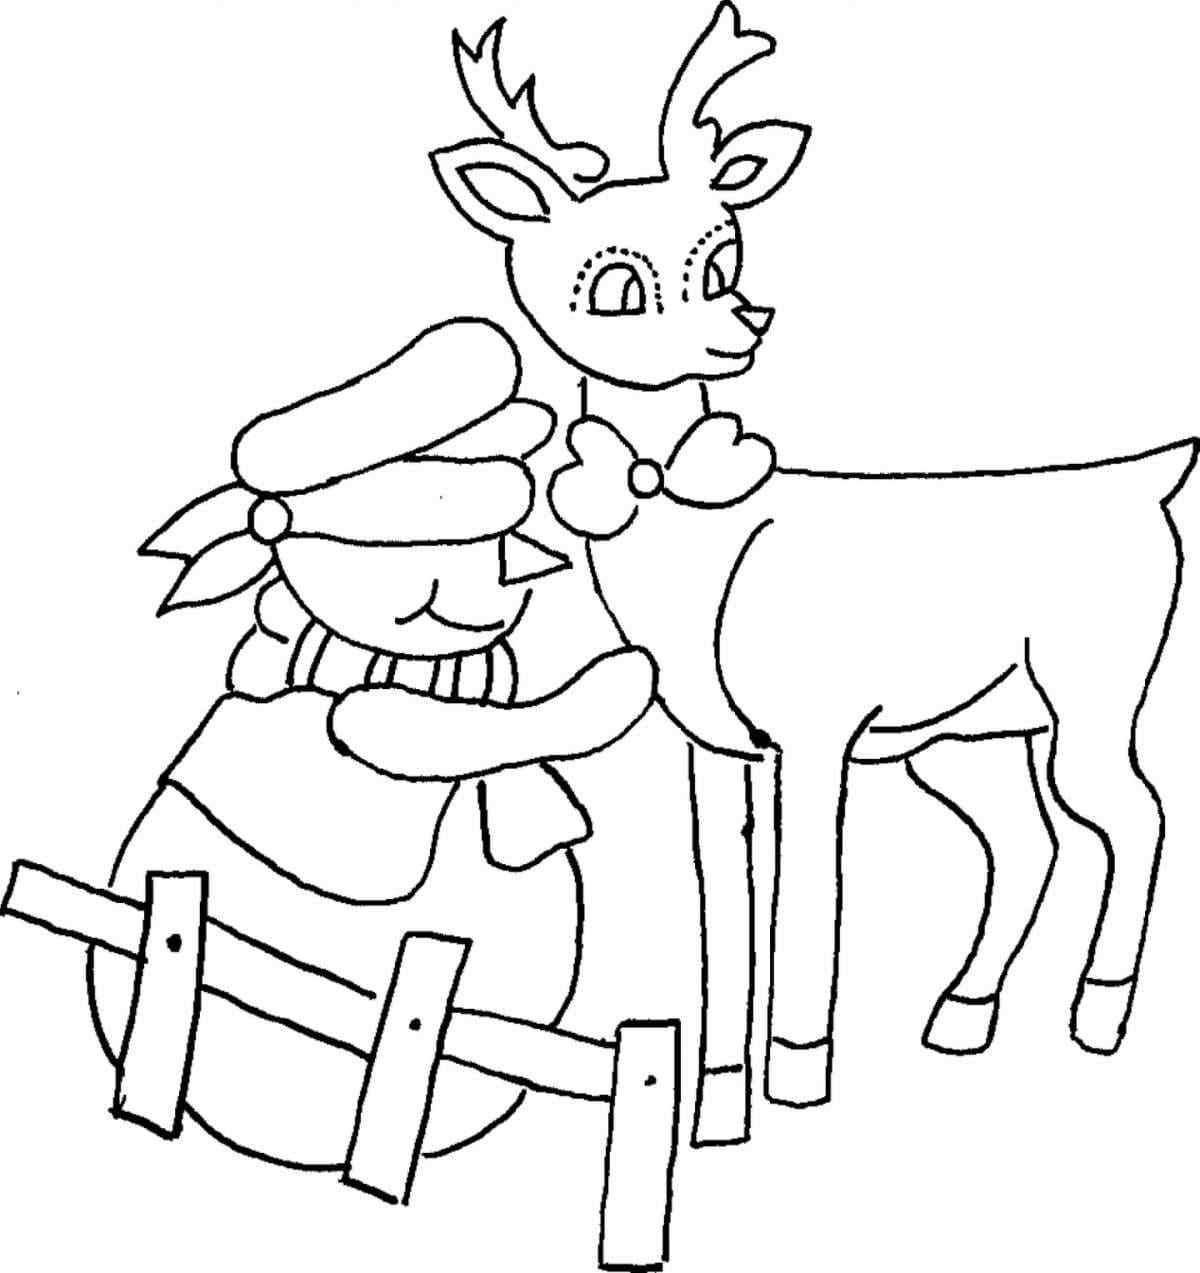 Prepare for the Holiday Coloring Page